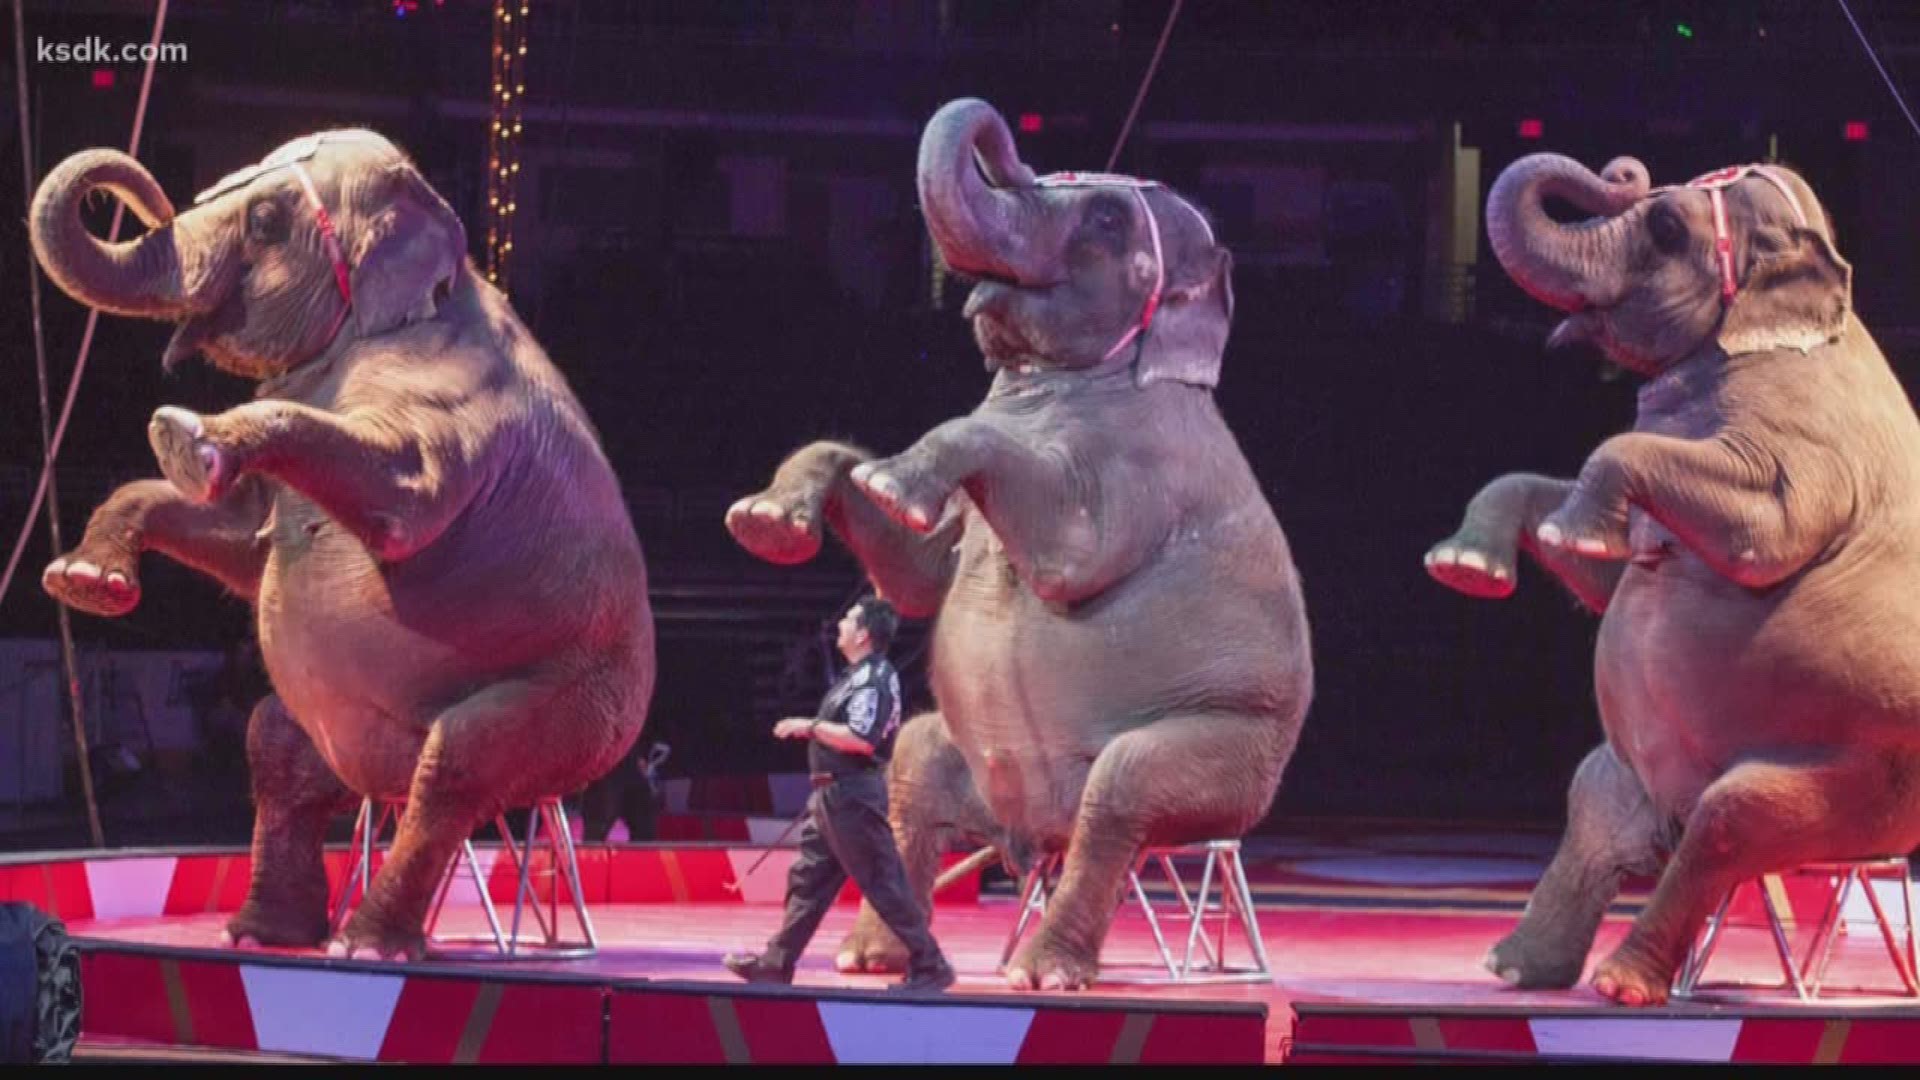 The 77th Moolah Shrine Circus will have you on the edge of your seat